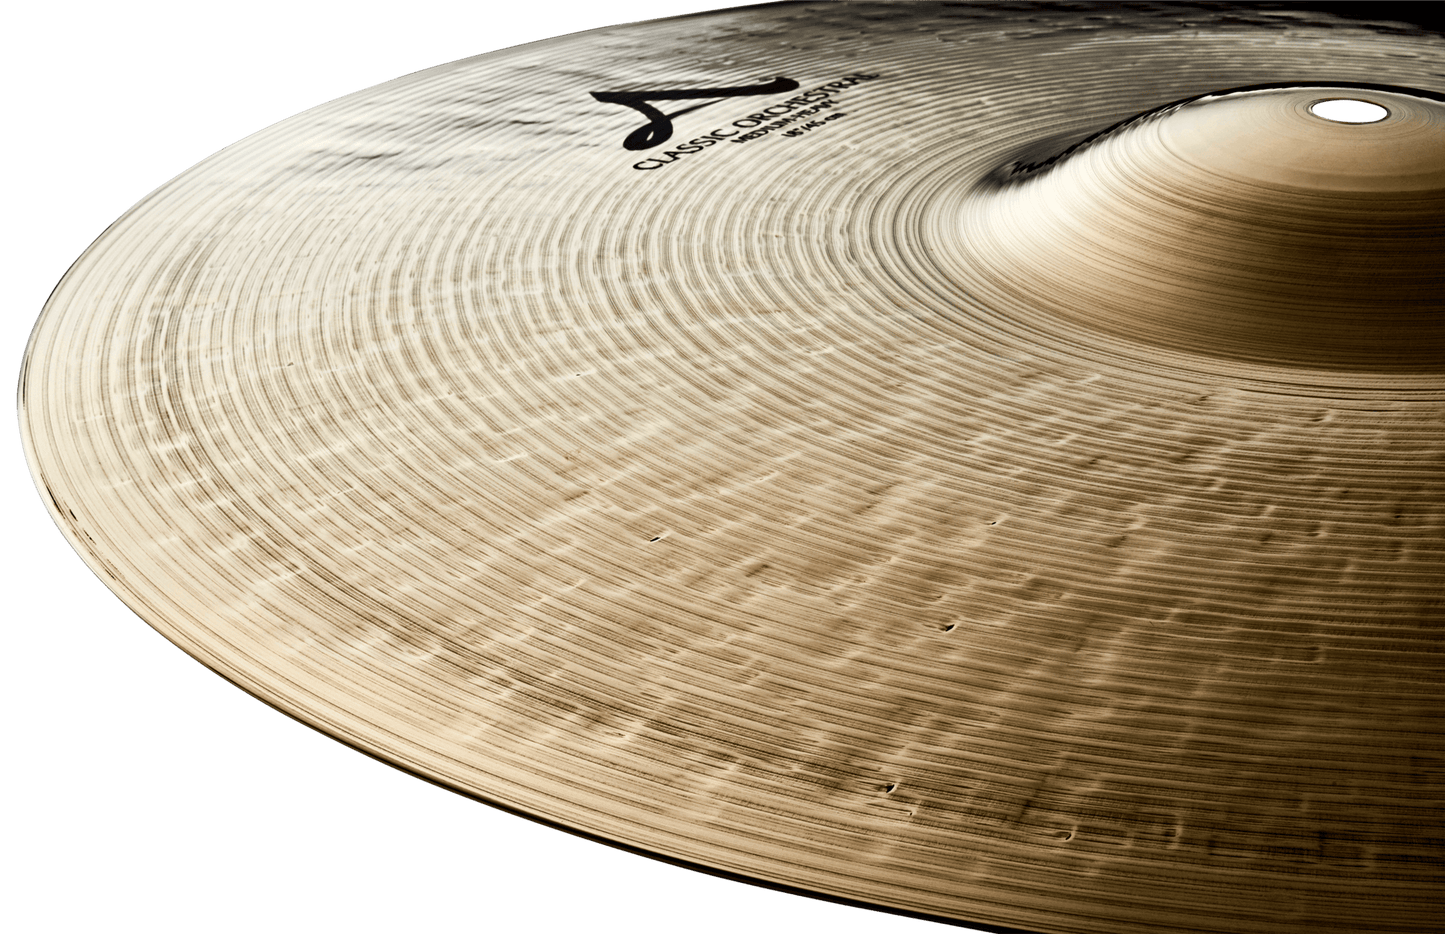 A Zildjian Classic Orchestral Selection - Medium Heavy, Pairs